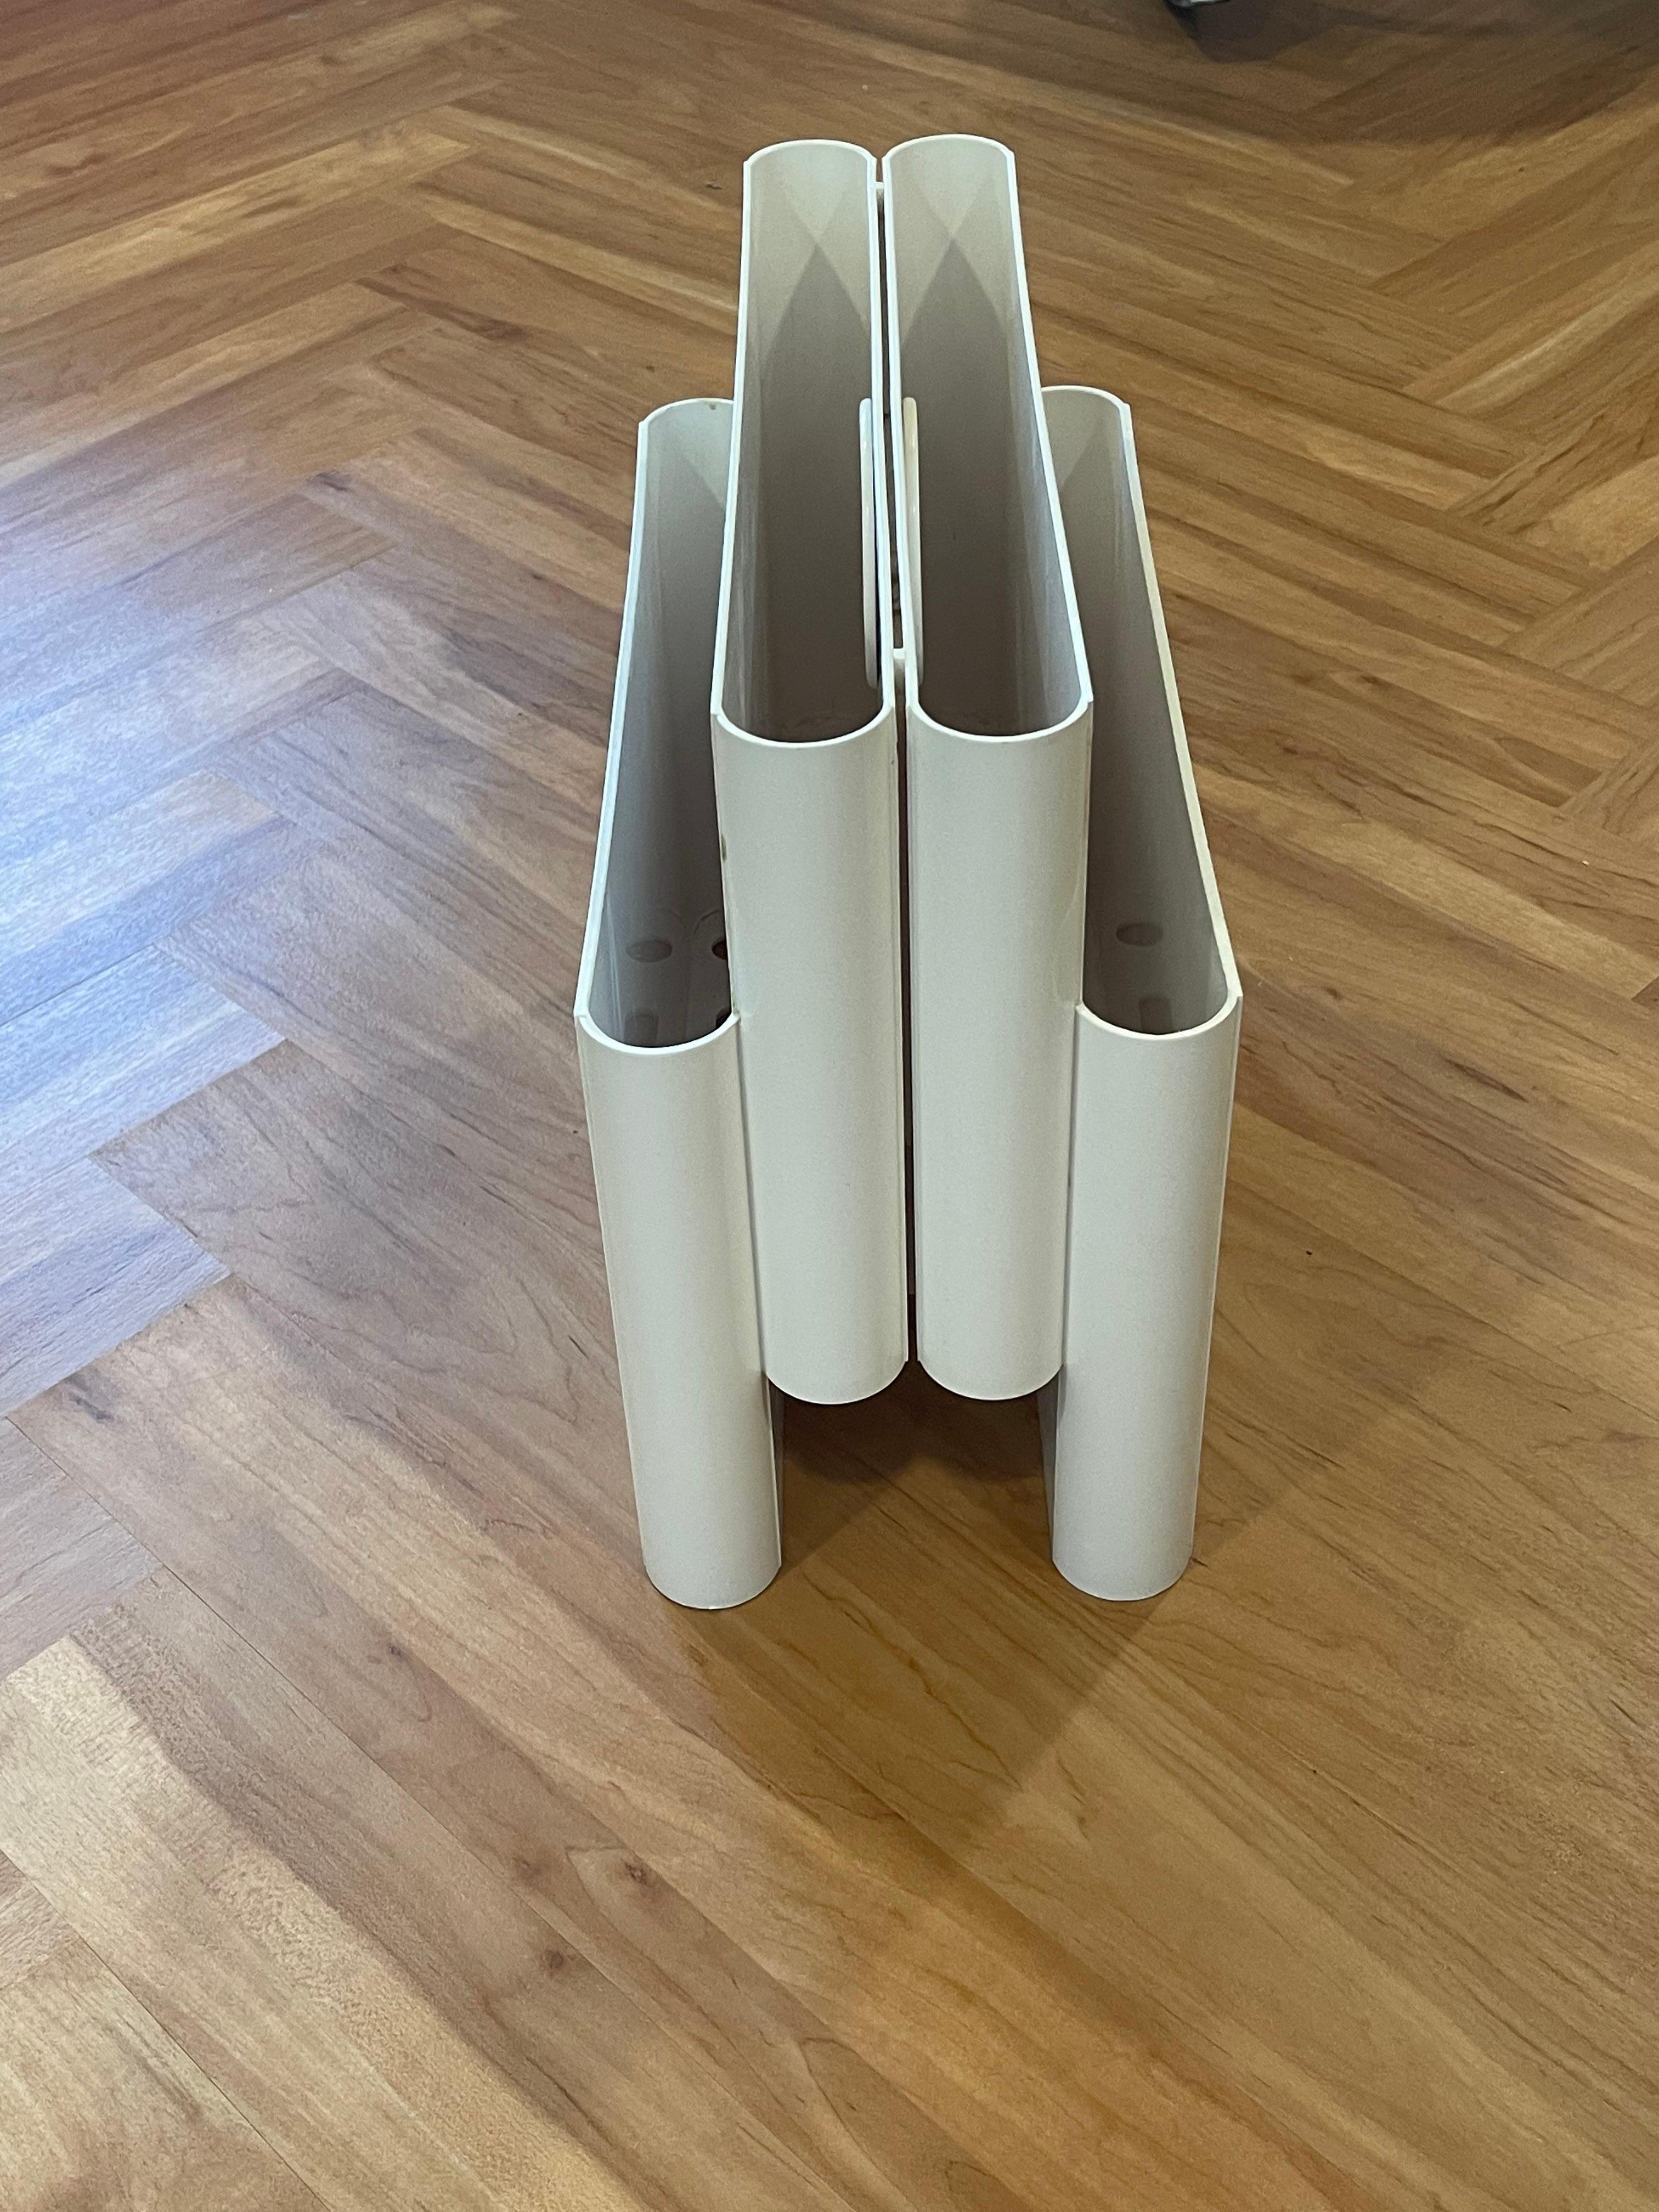 Space Age Portarviste Magazine Rack, Giotto Stoppino for Kartell, 1971